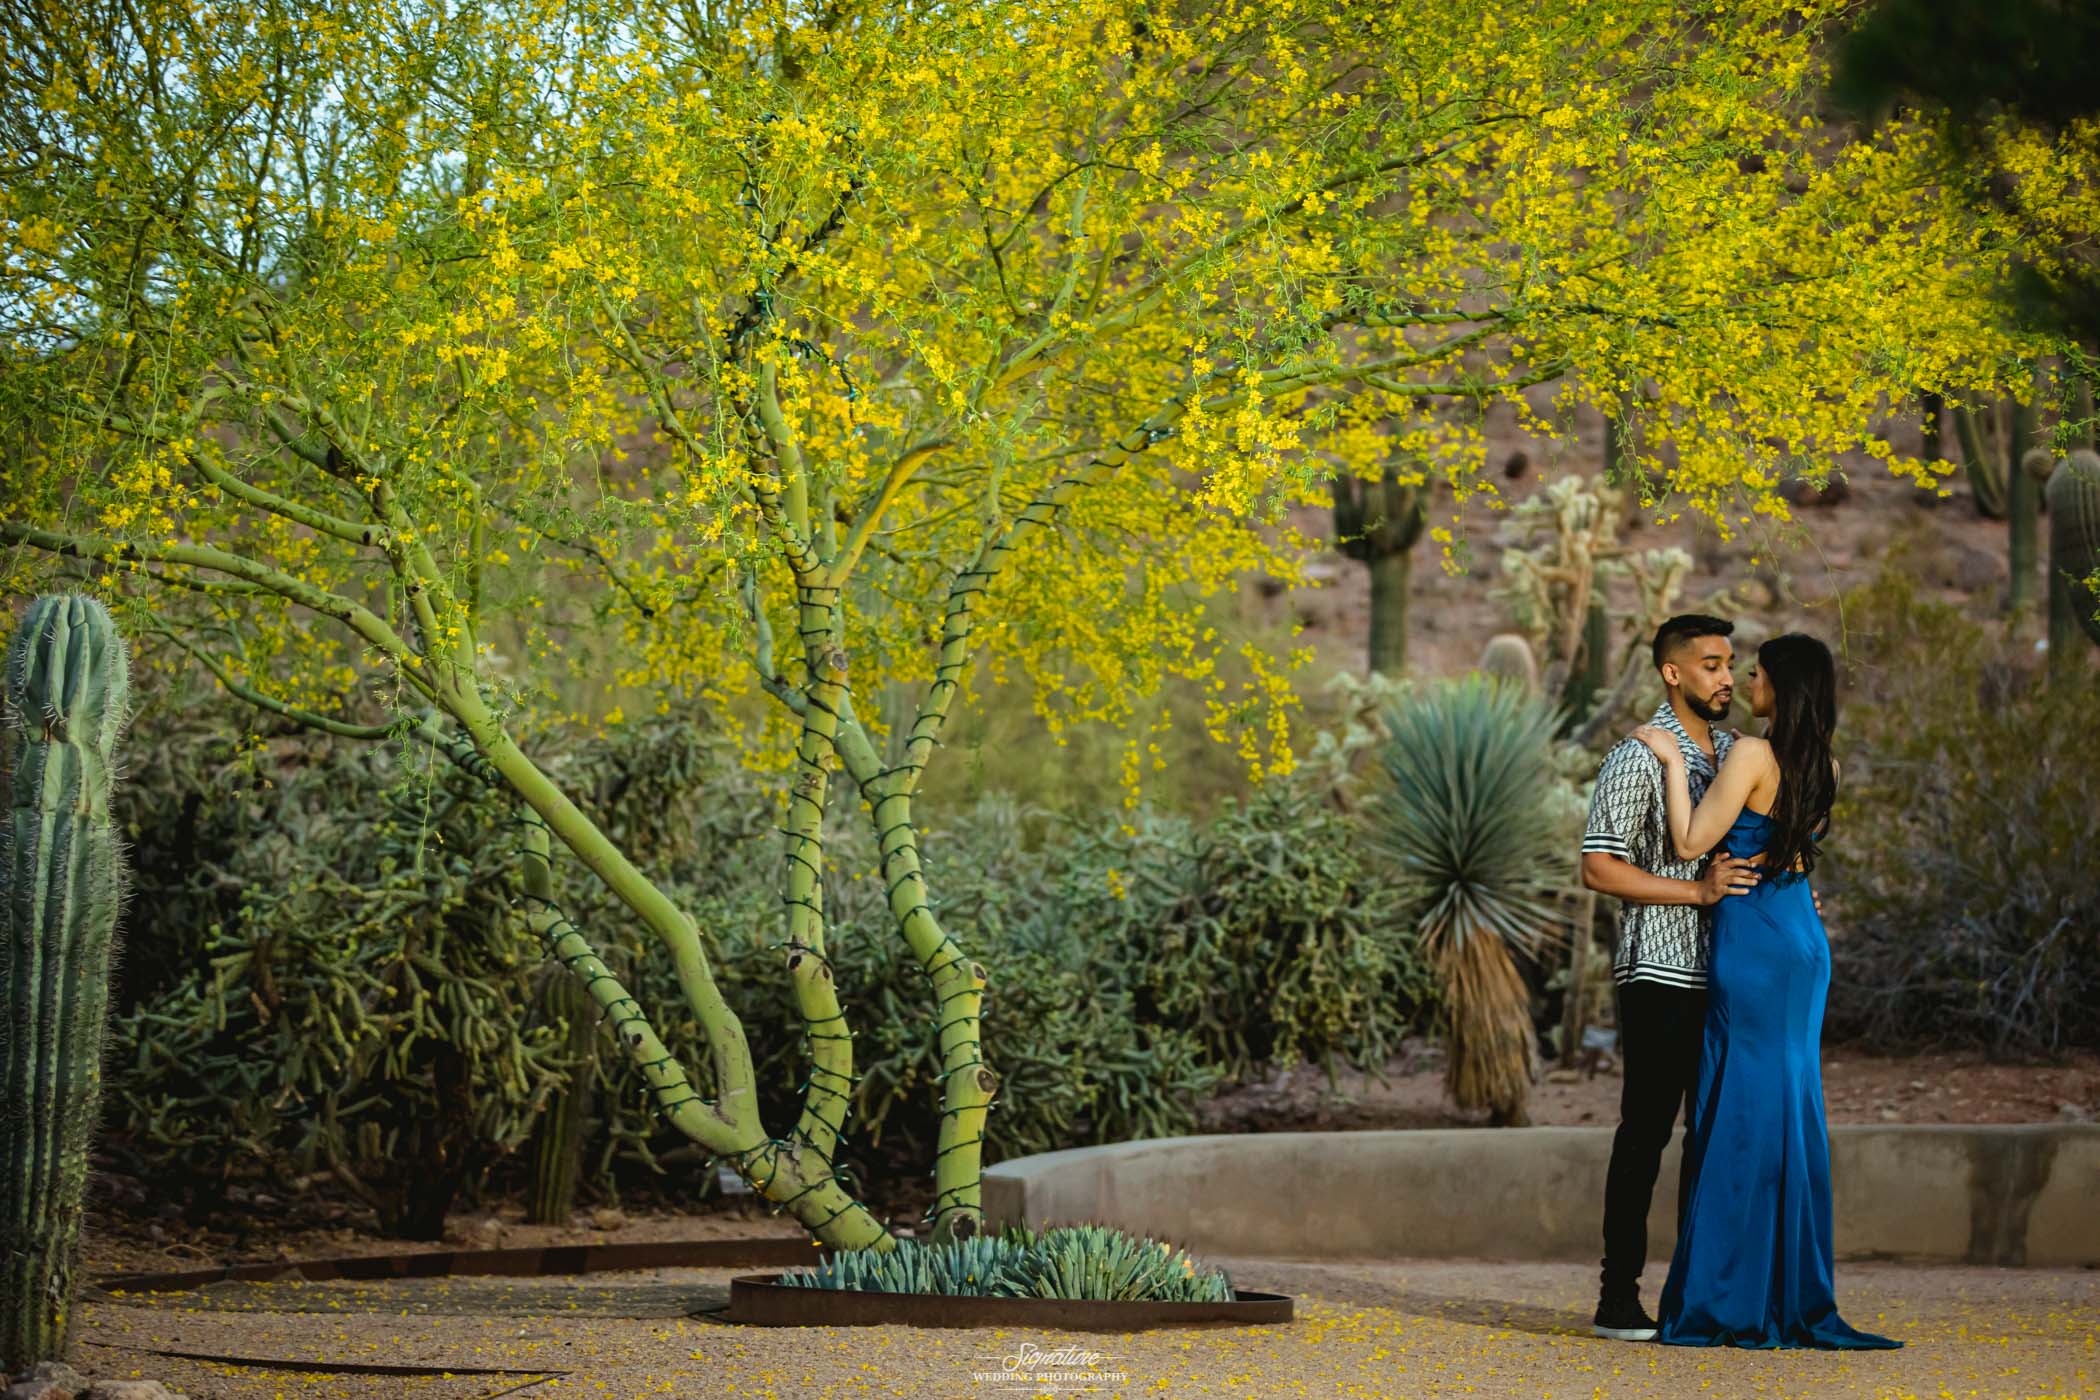 Couple embracing each other under tree in desert